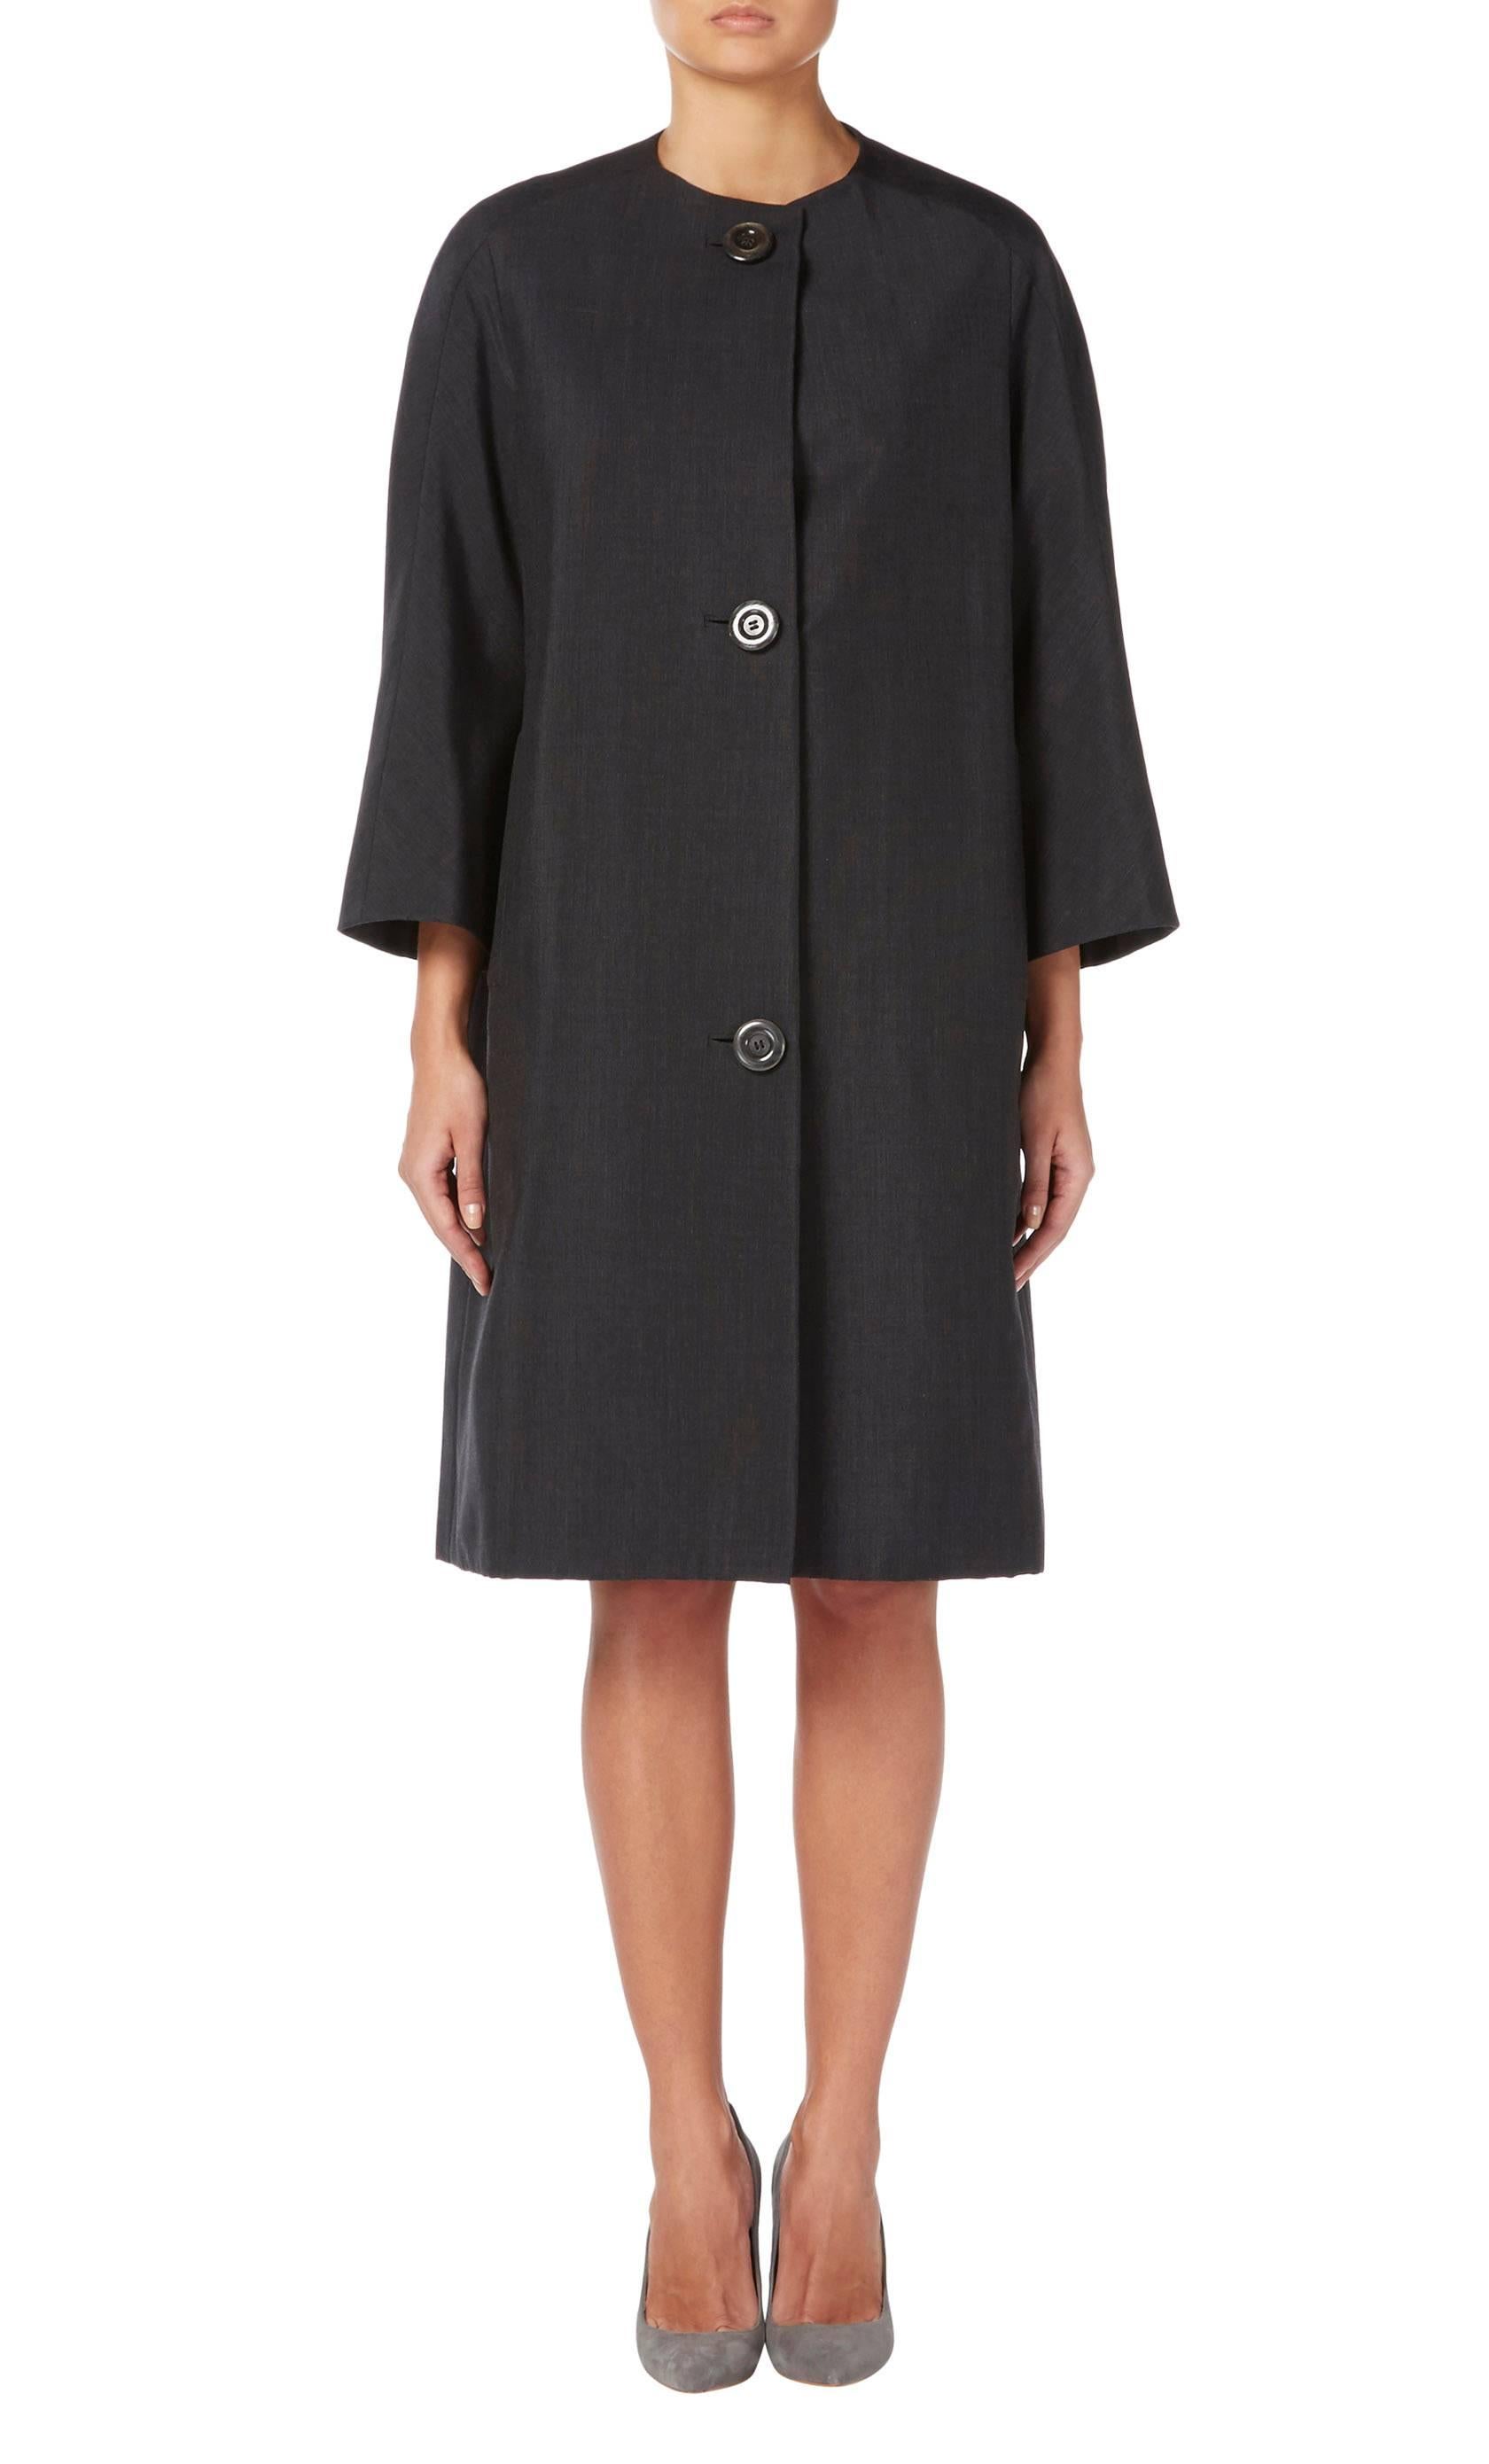 With a classic 60s swing cut, this flattering Dior haute couture coat is a fantastic piece for layering. Constructed in charcoal grey wool, the coat has a collarless neckline and slip pockets on the hip with three large buttons fastening to the